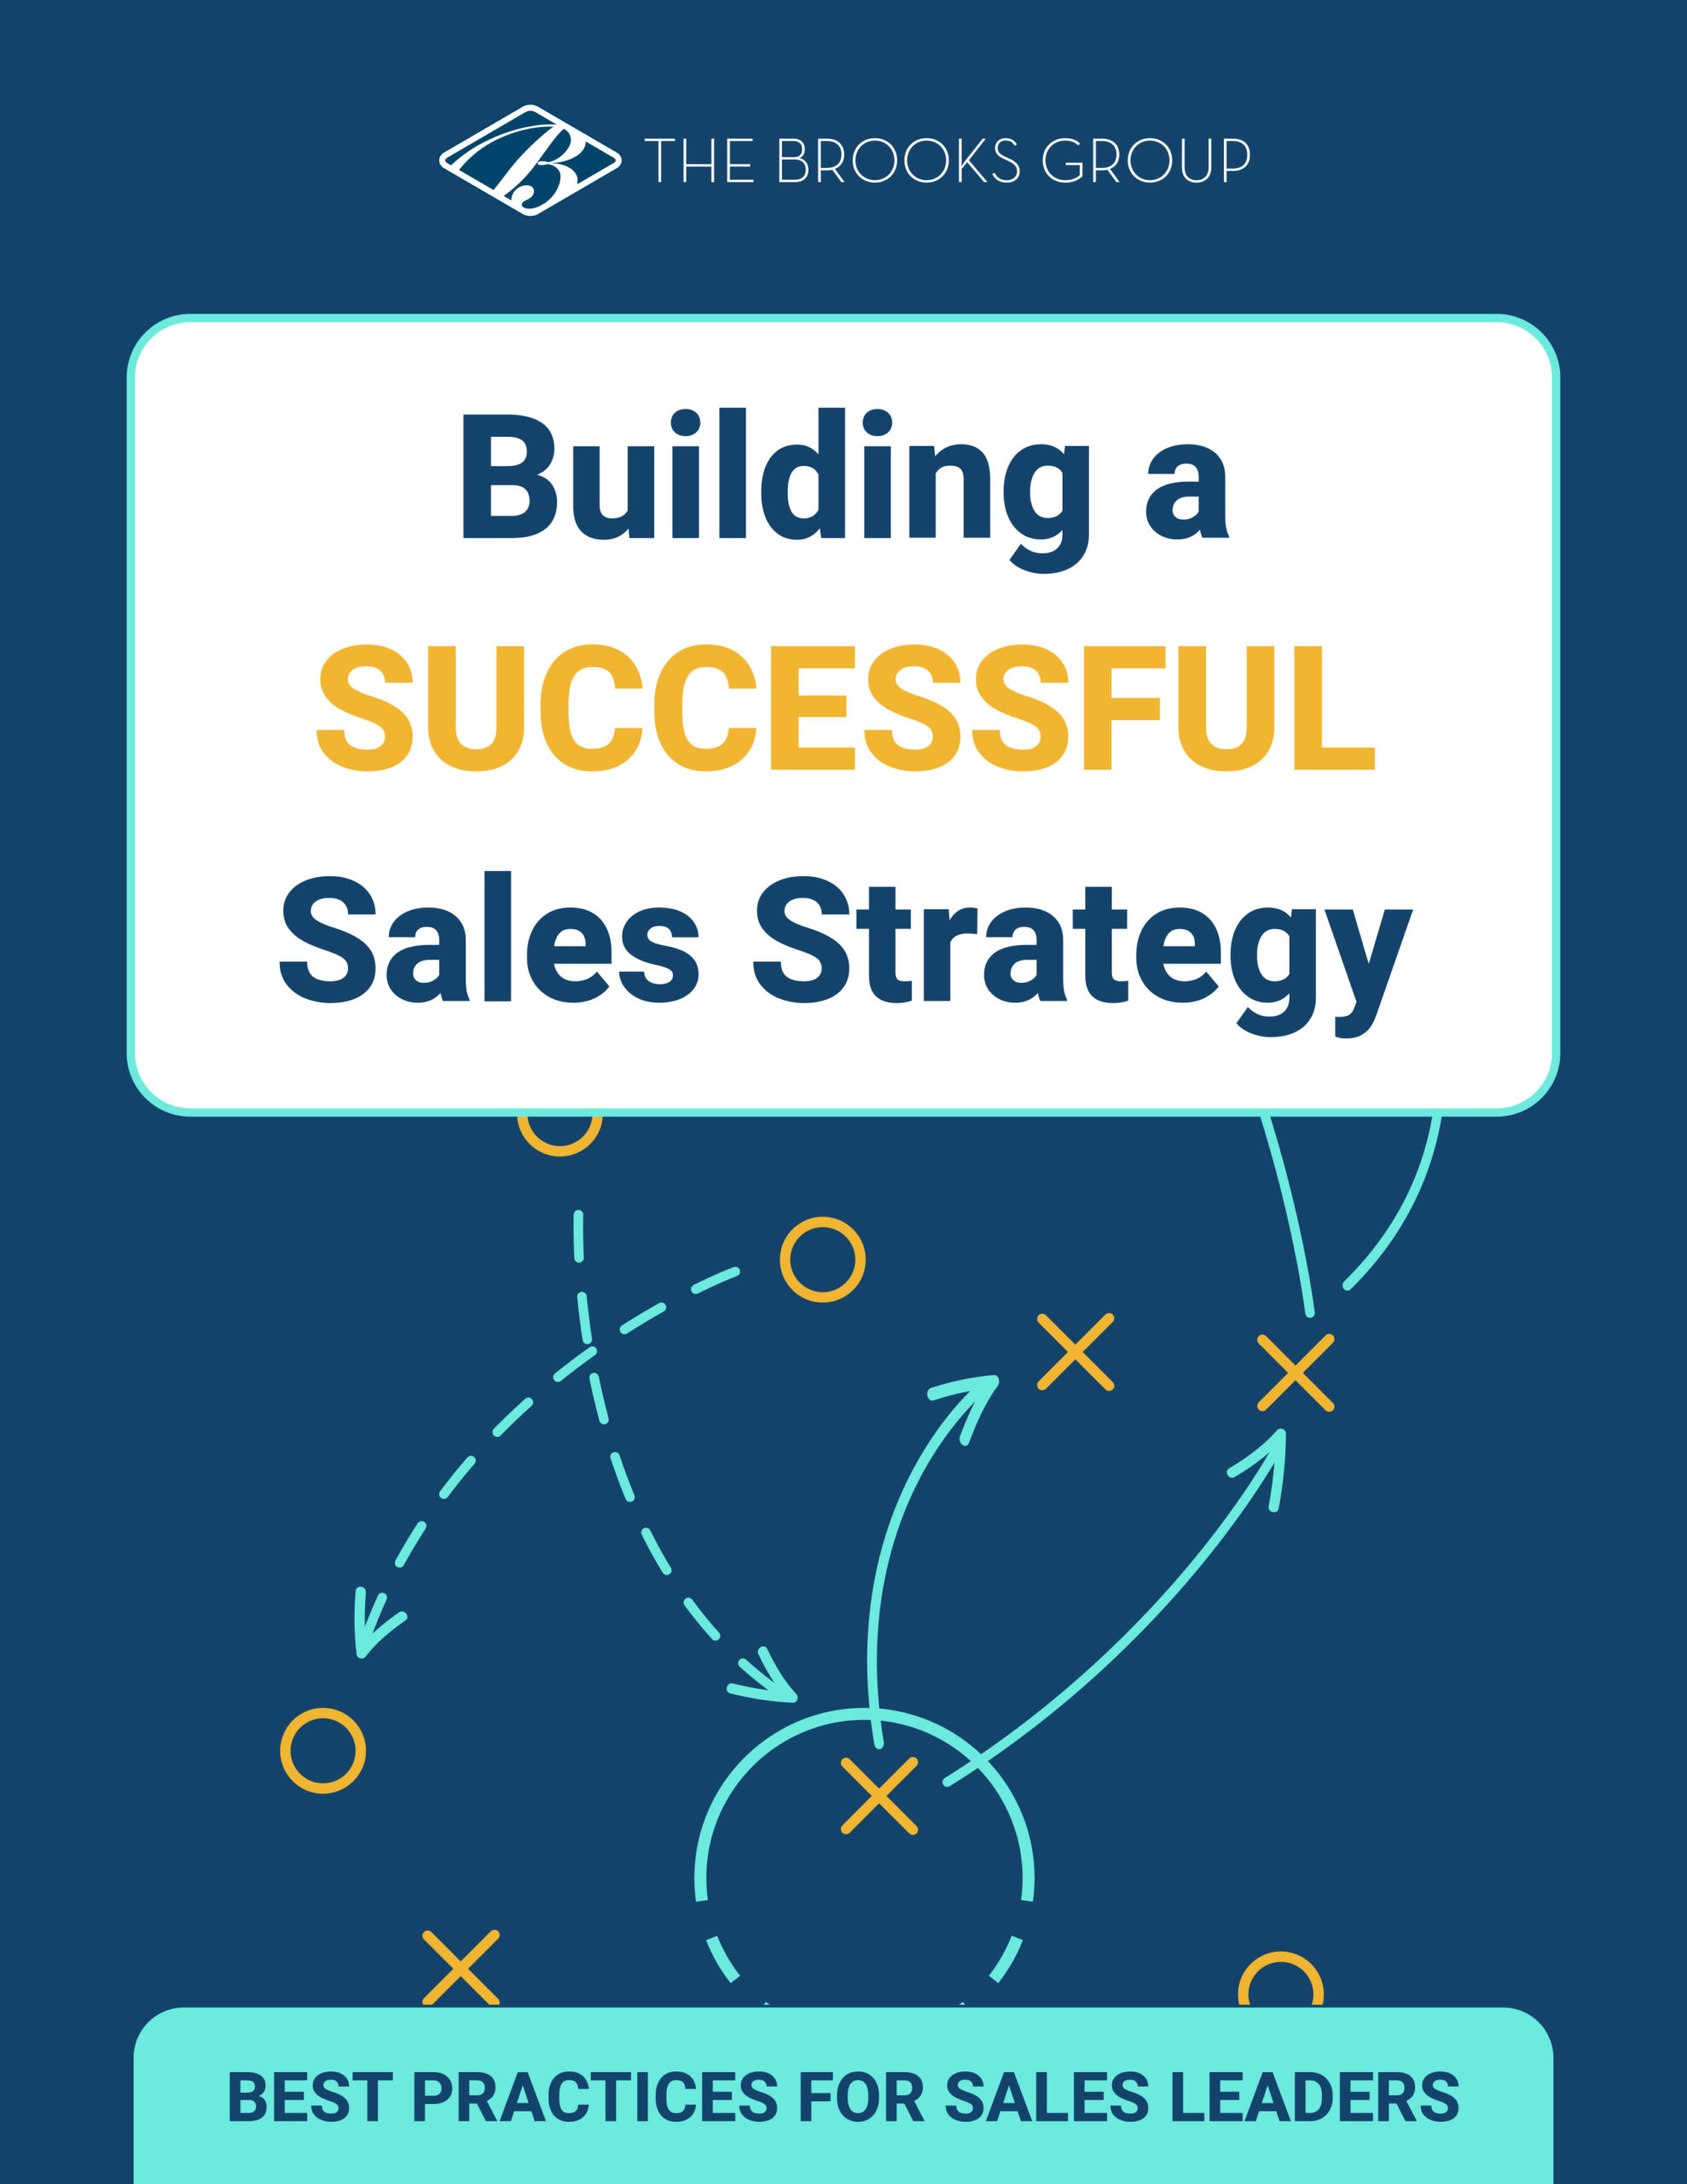 Building a Successful Sales Strategy